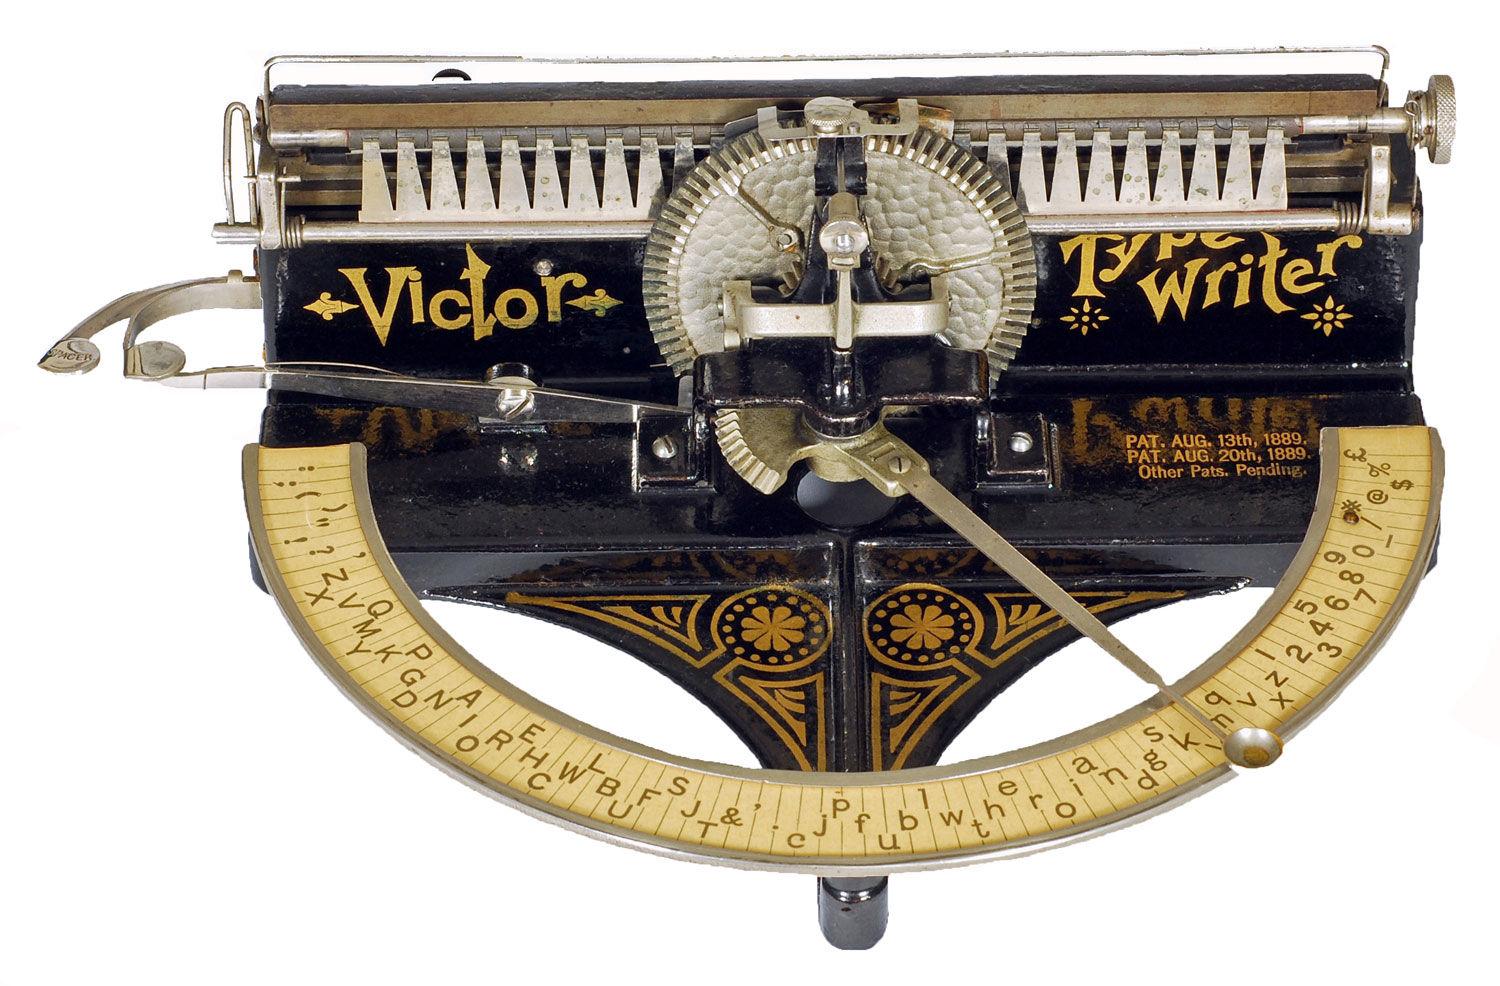 Photograph of the Victor typewriter.